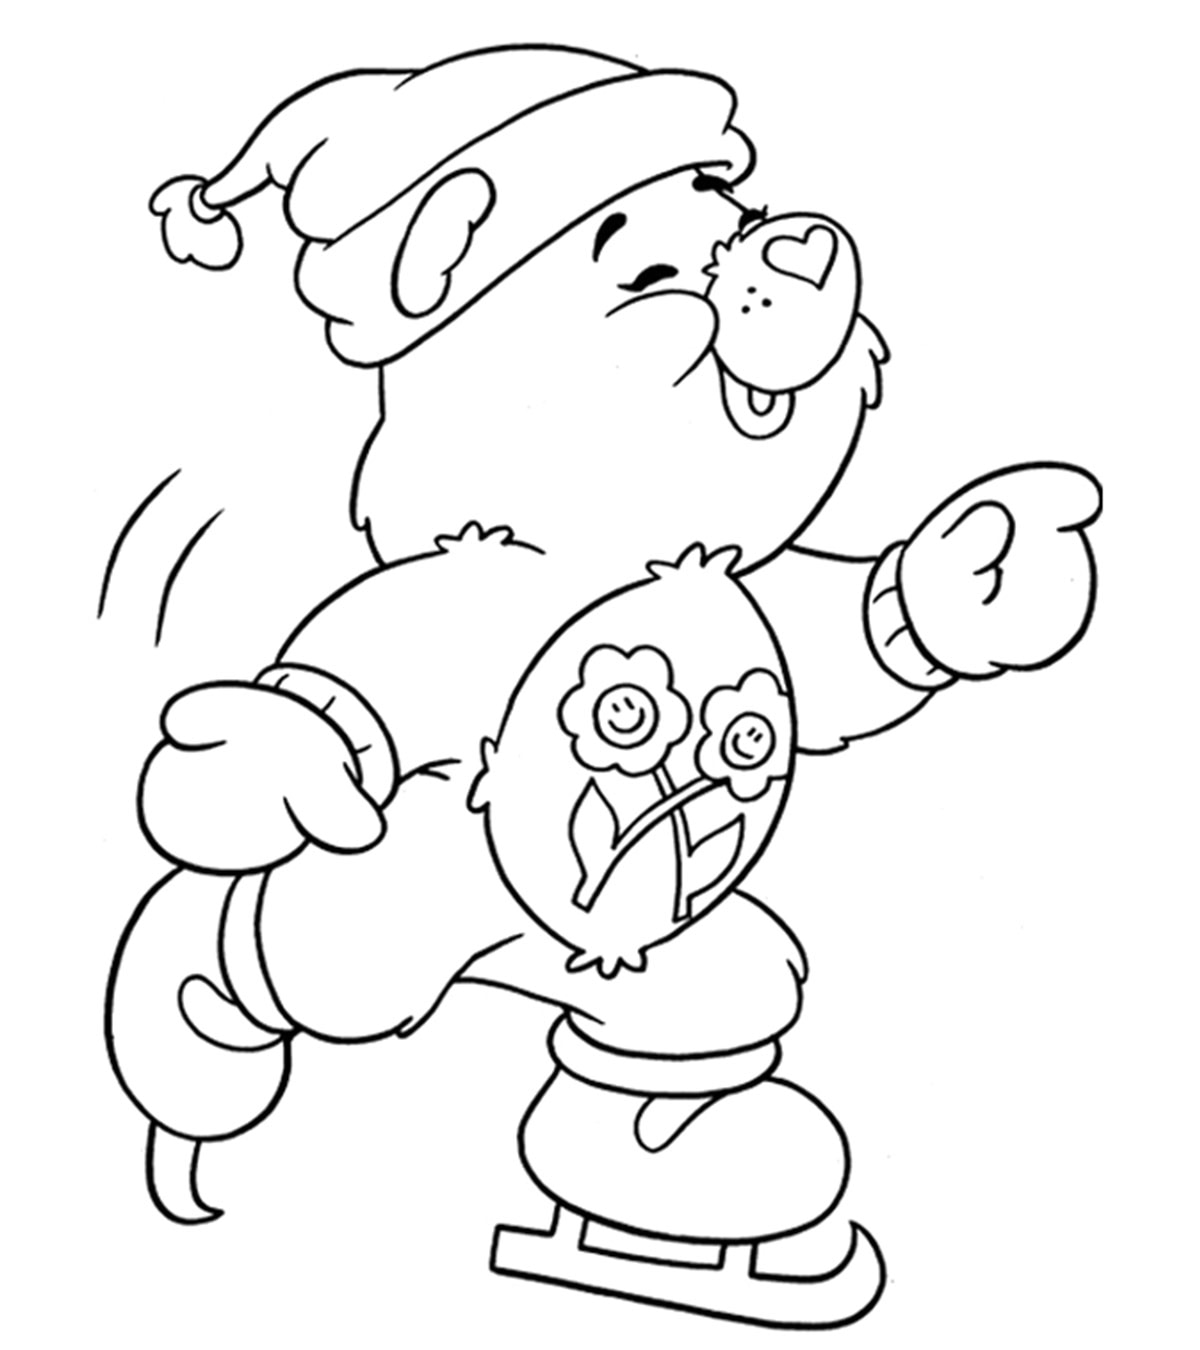 Top 25 Winter Coloring Pages For Your Little Ones_image